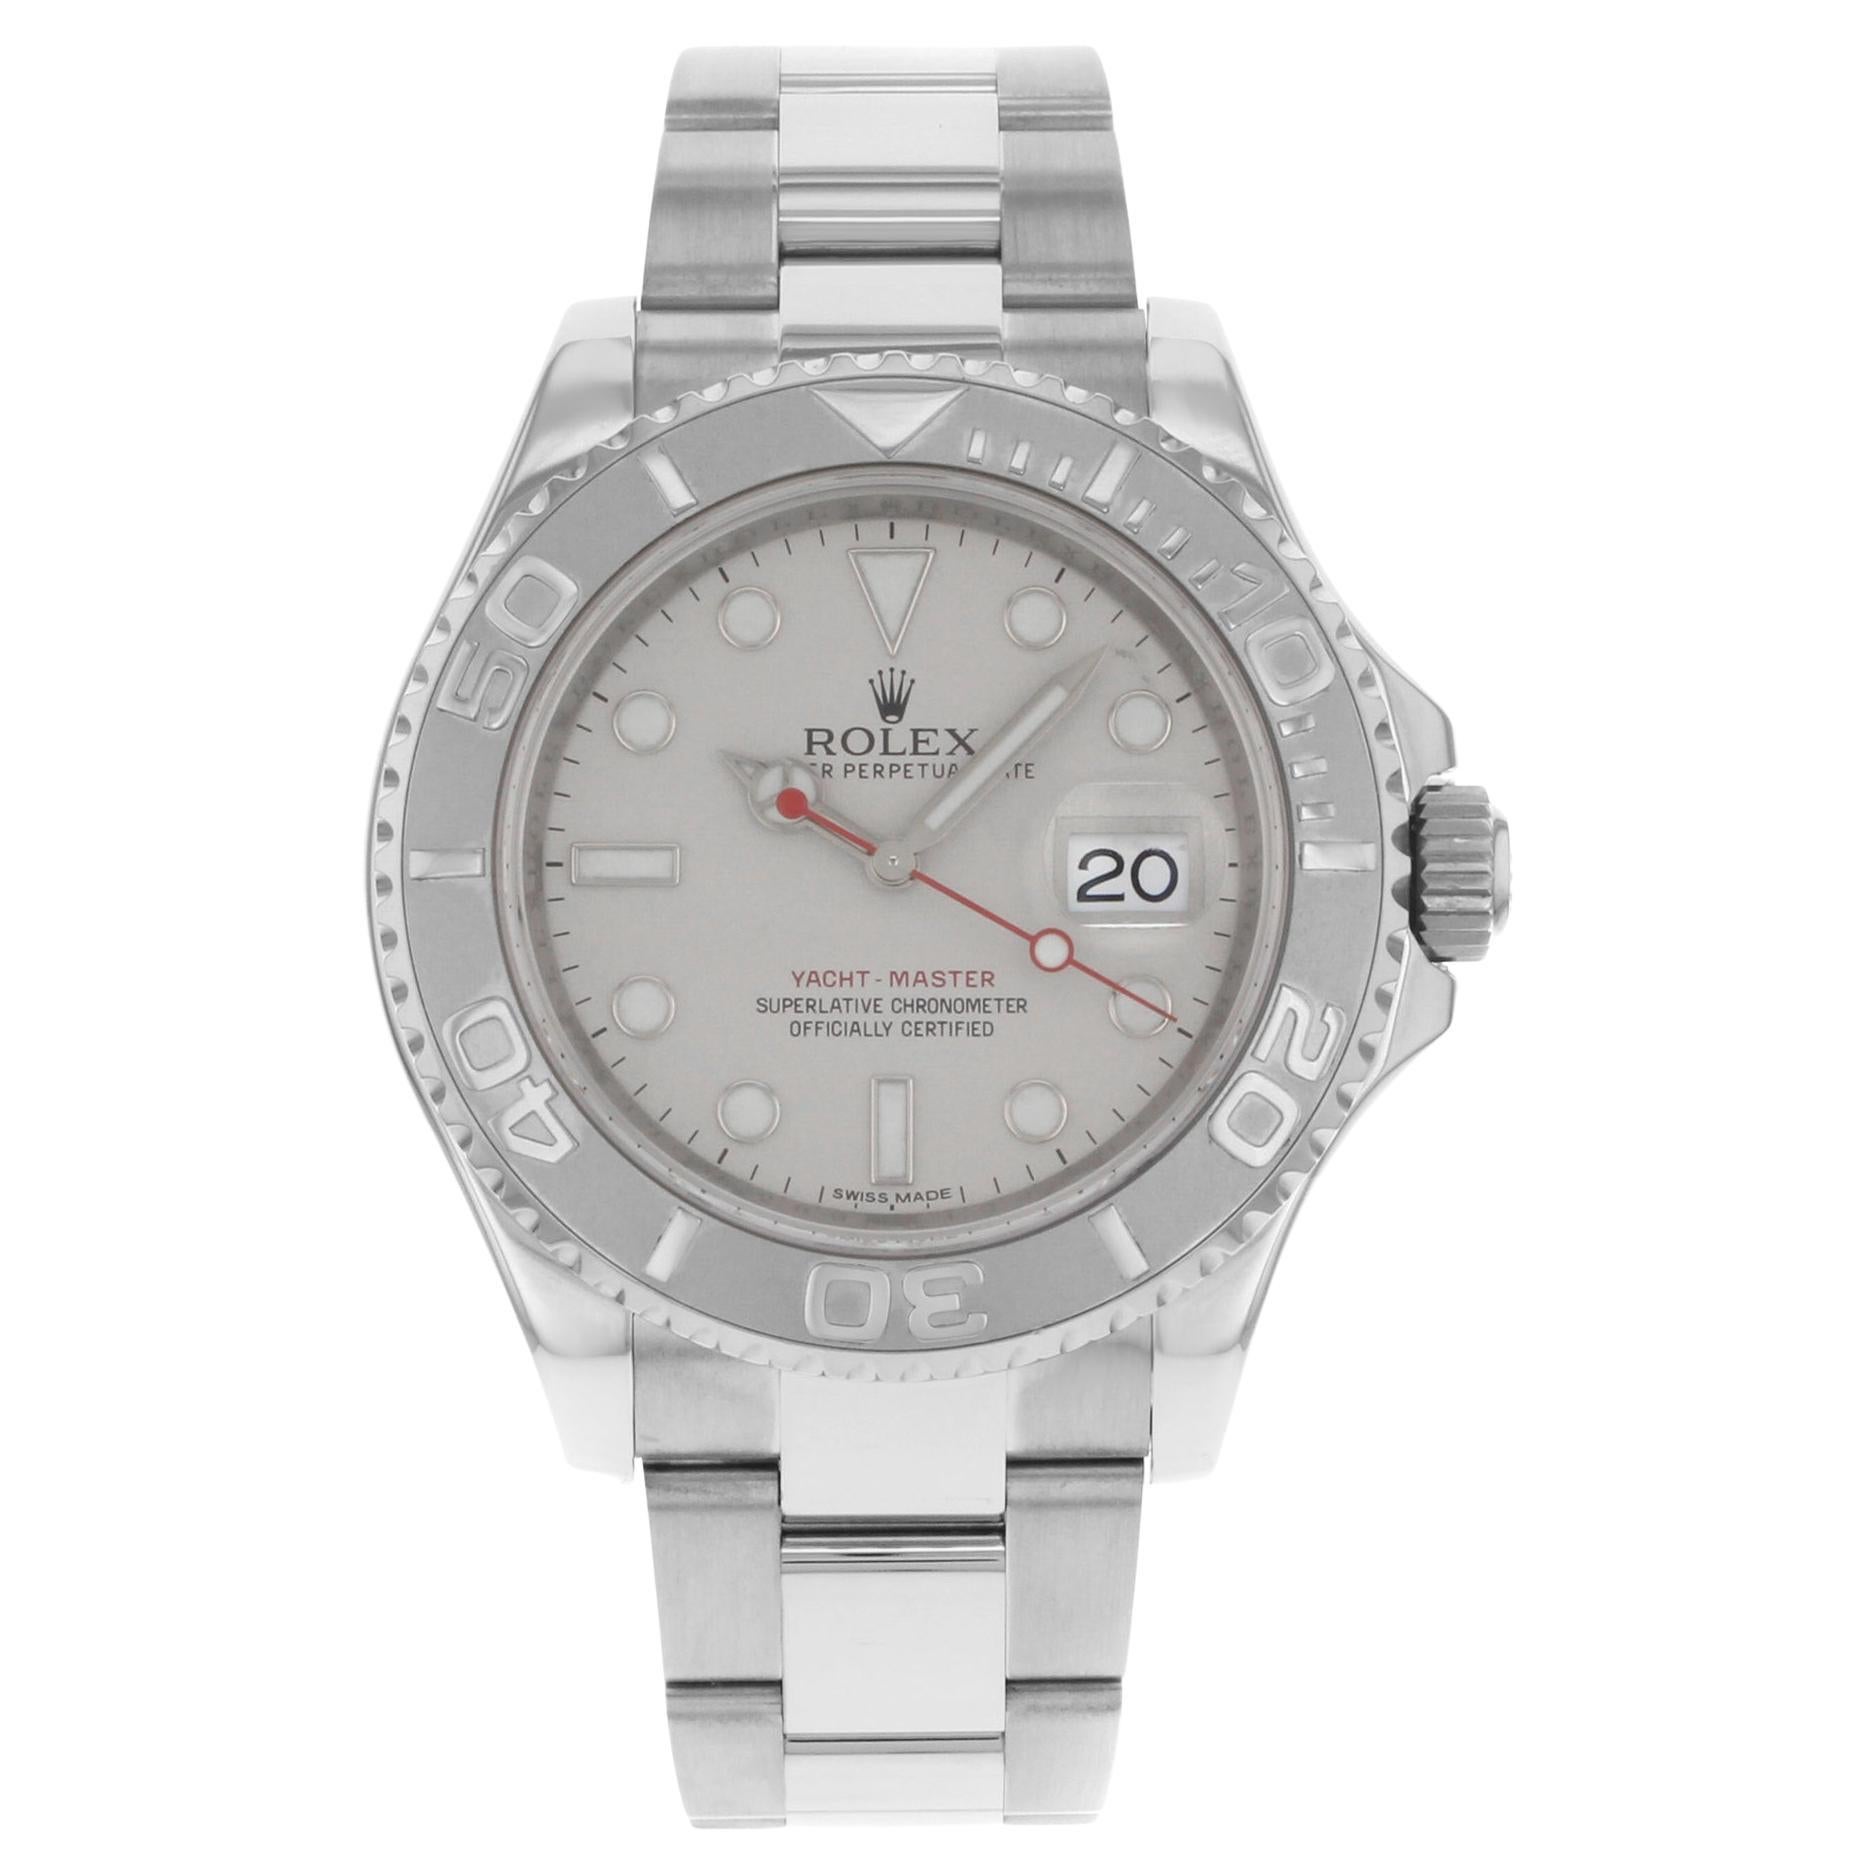 Rolex Yacht-Master Steel Platinum Bezel Gray Dial Automatic Watch 116622 For Sale